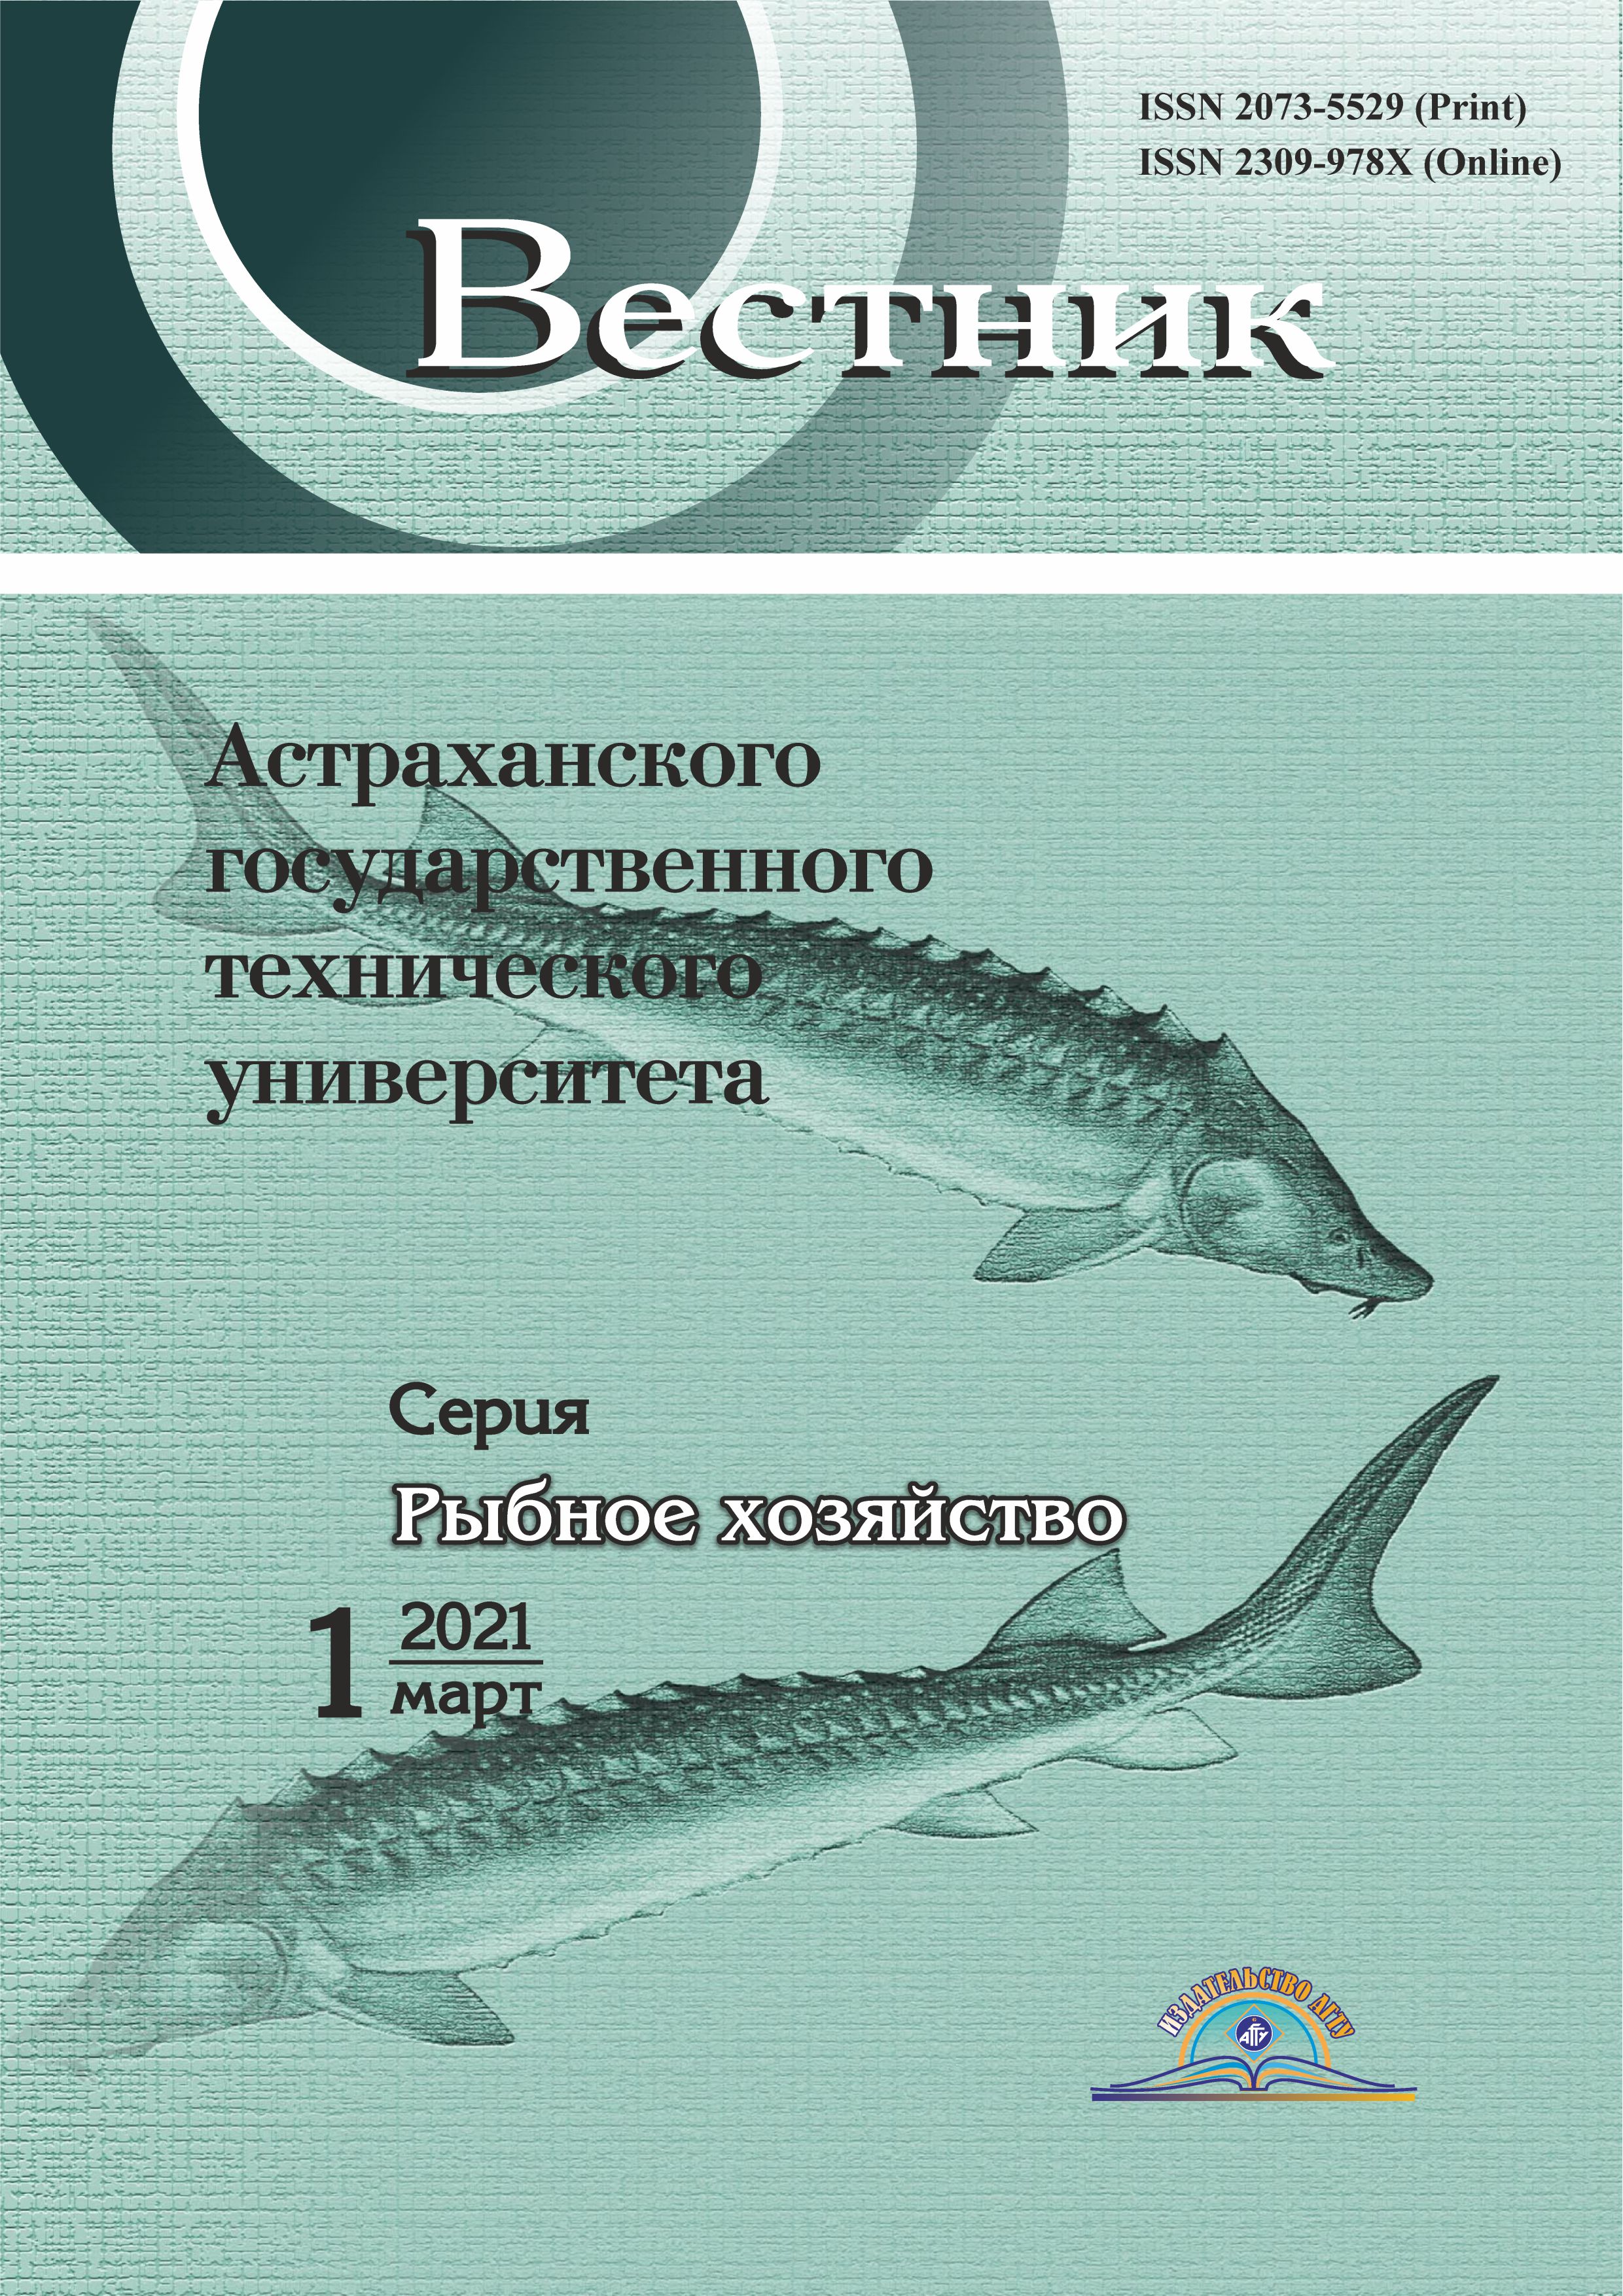                         SPECIFIC FEATURES OF DISTRIBUTION OF MINERALS  IN ORGANS AND TISSUES  OF HERRING SPECIES (CLUPEIDAE) IN CASPIAN SEA
            